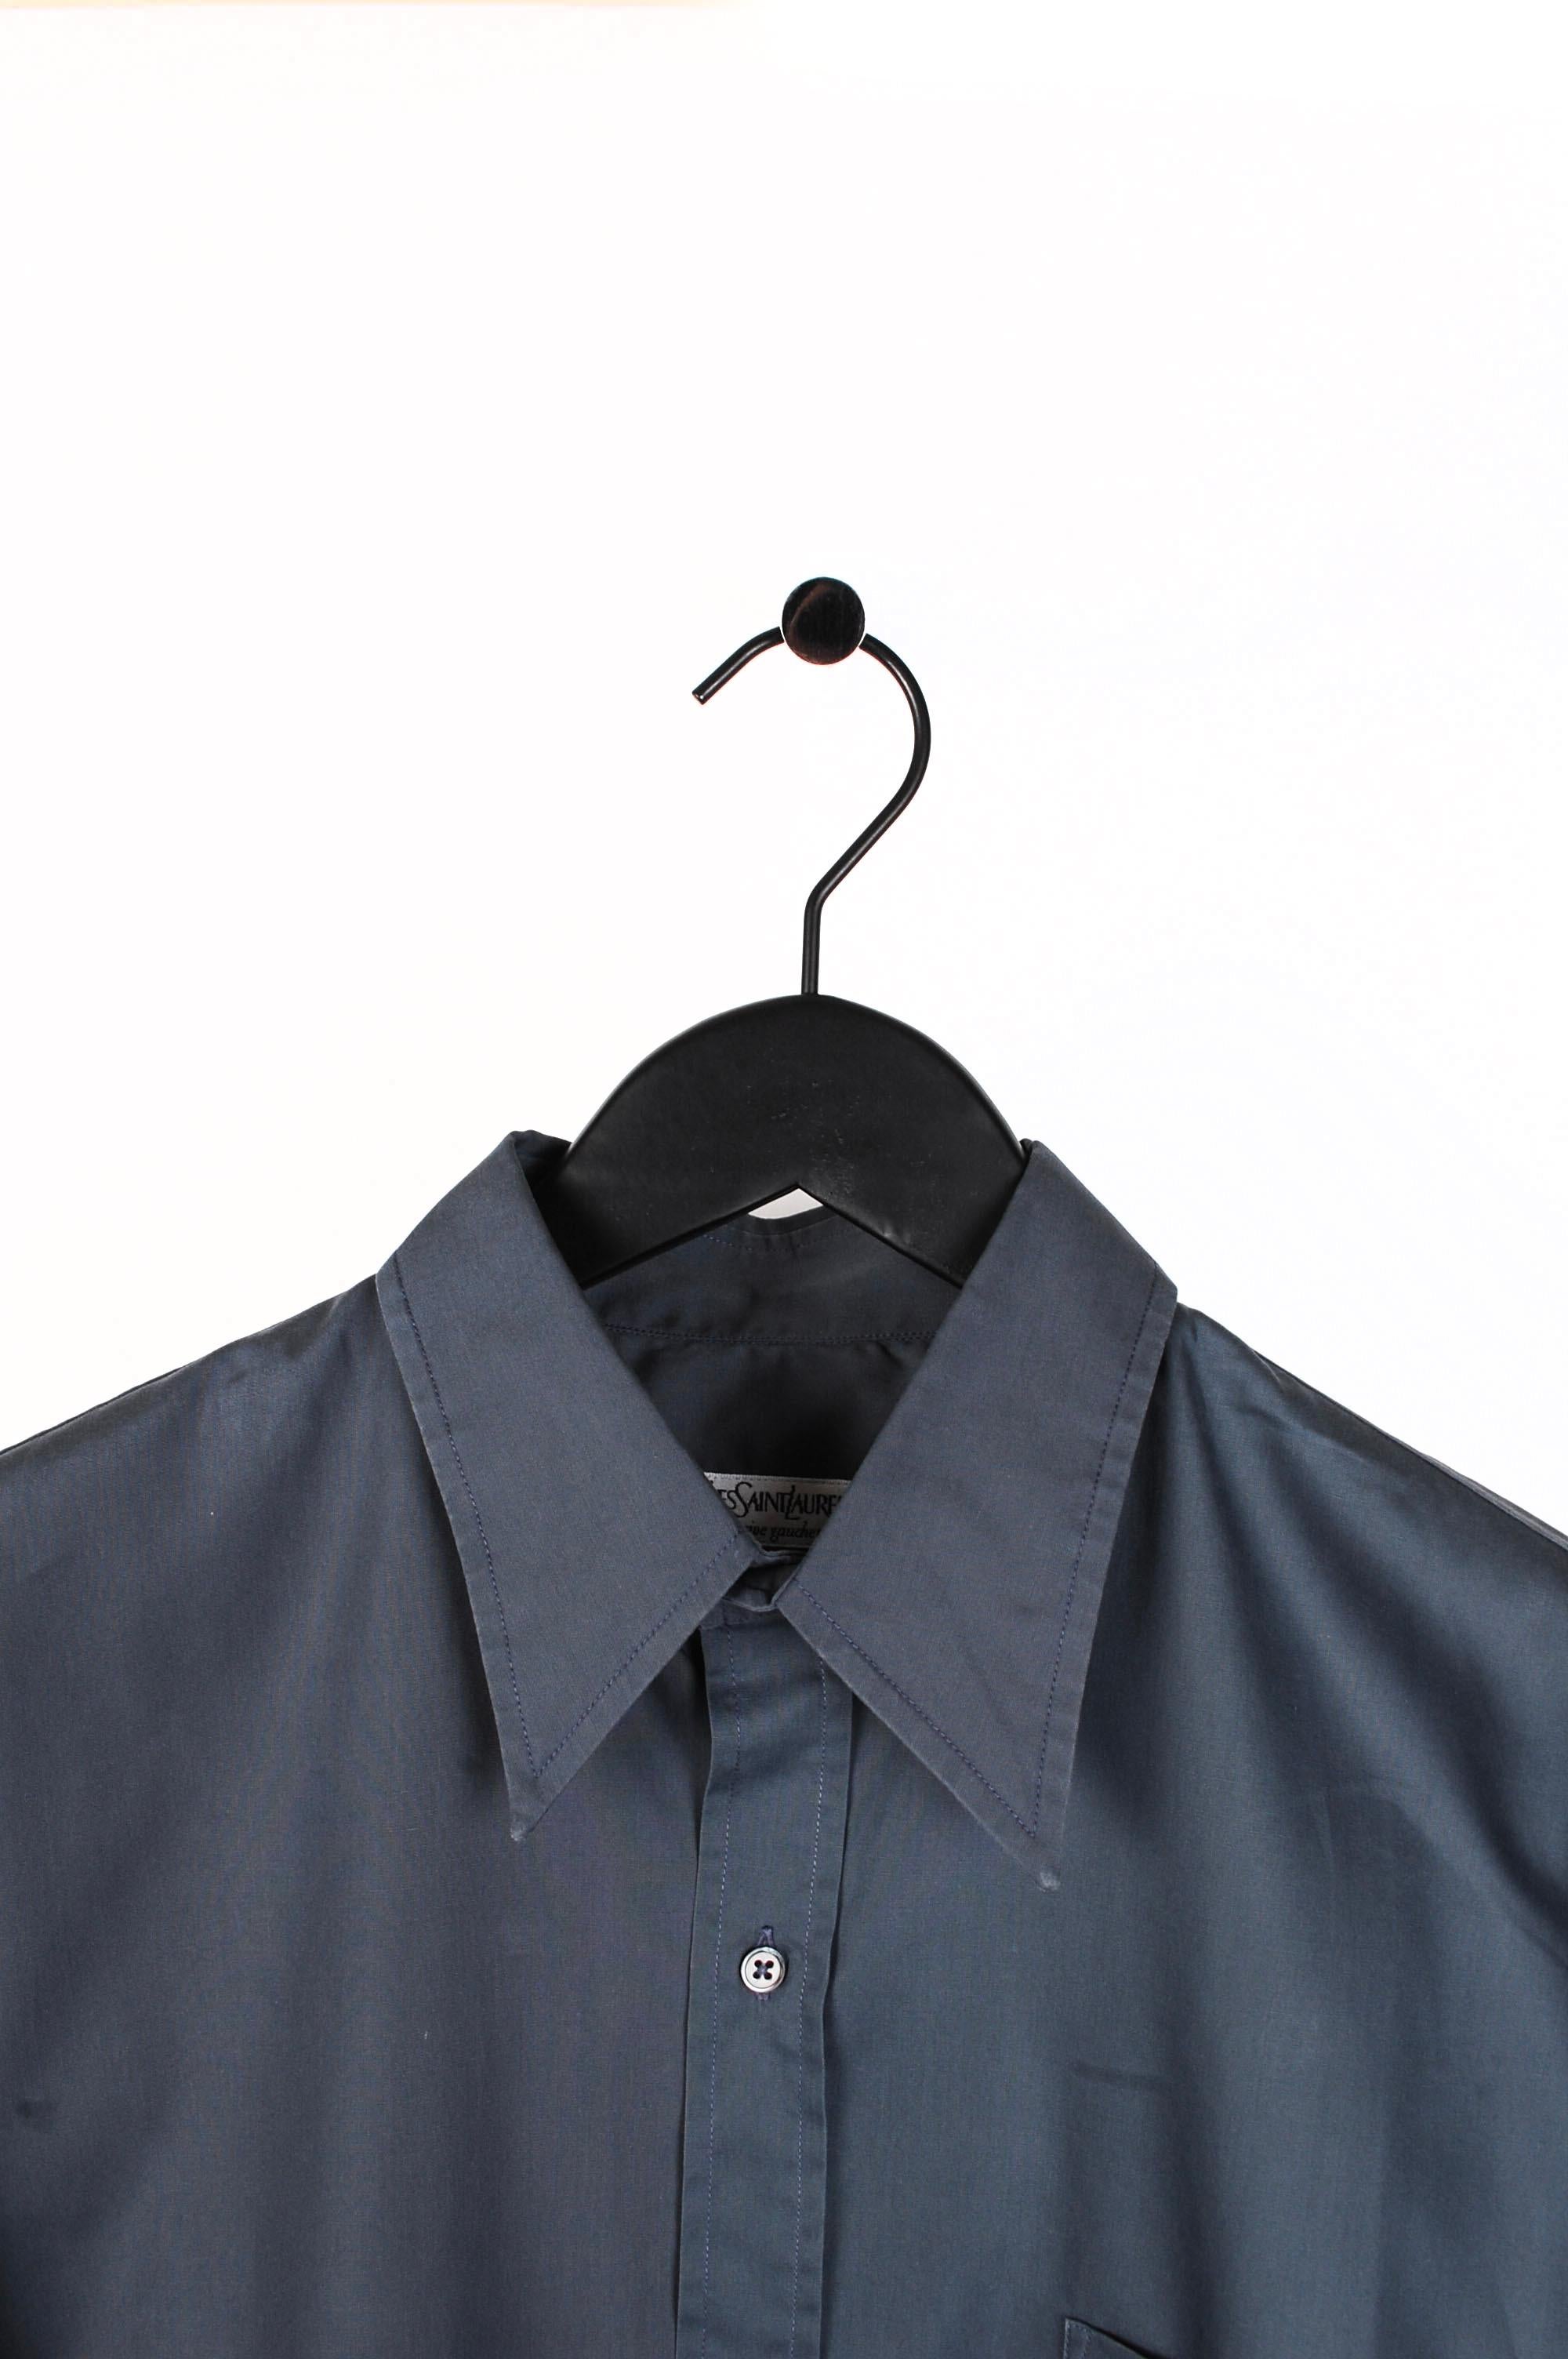 Item for sale is 100% genuine Yves Saint Laurent Rive Gauche Shirt S054
Color: Greyish blue
(An actual color may a bit vary due to individual computer screen interpretation)
Material: 100% cotton
Tag size:41/16 (Large)
This shirt is great quality